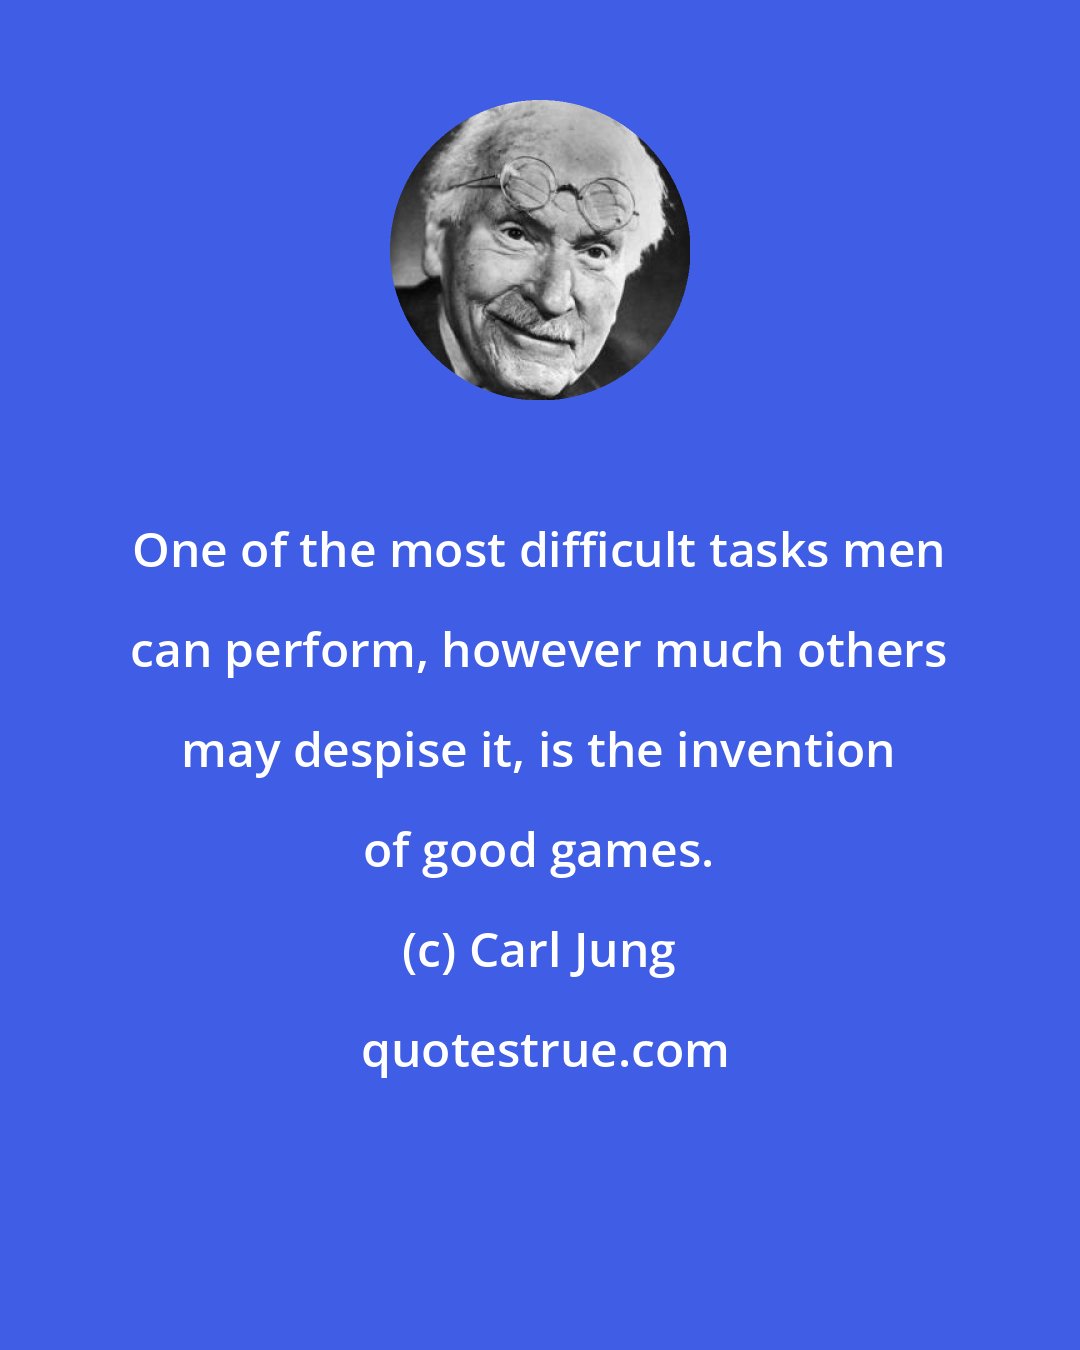 Carl Jung: One of the most difficult tasks men can perform, however much others may despise it, is the invention of good games.